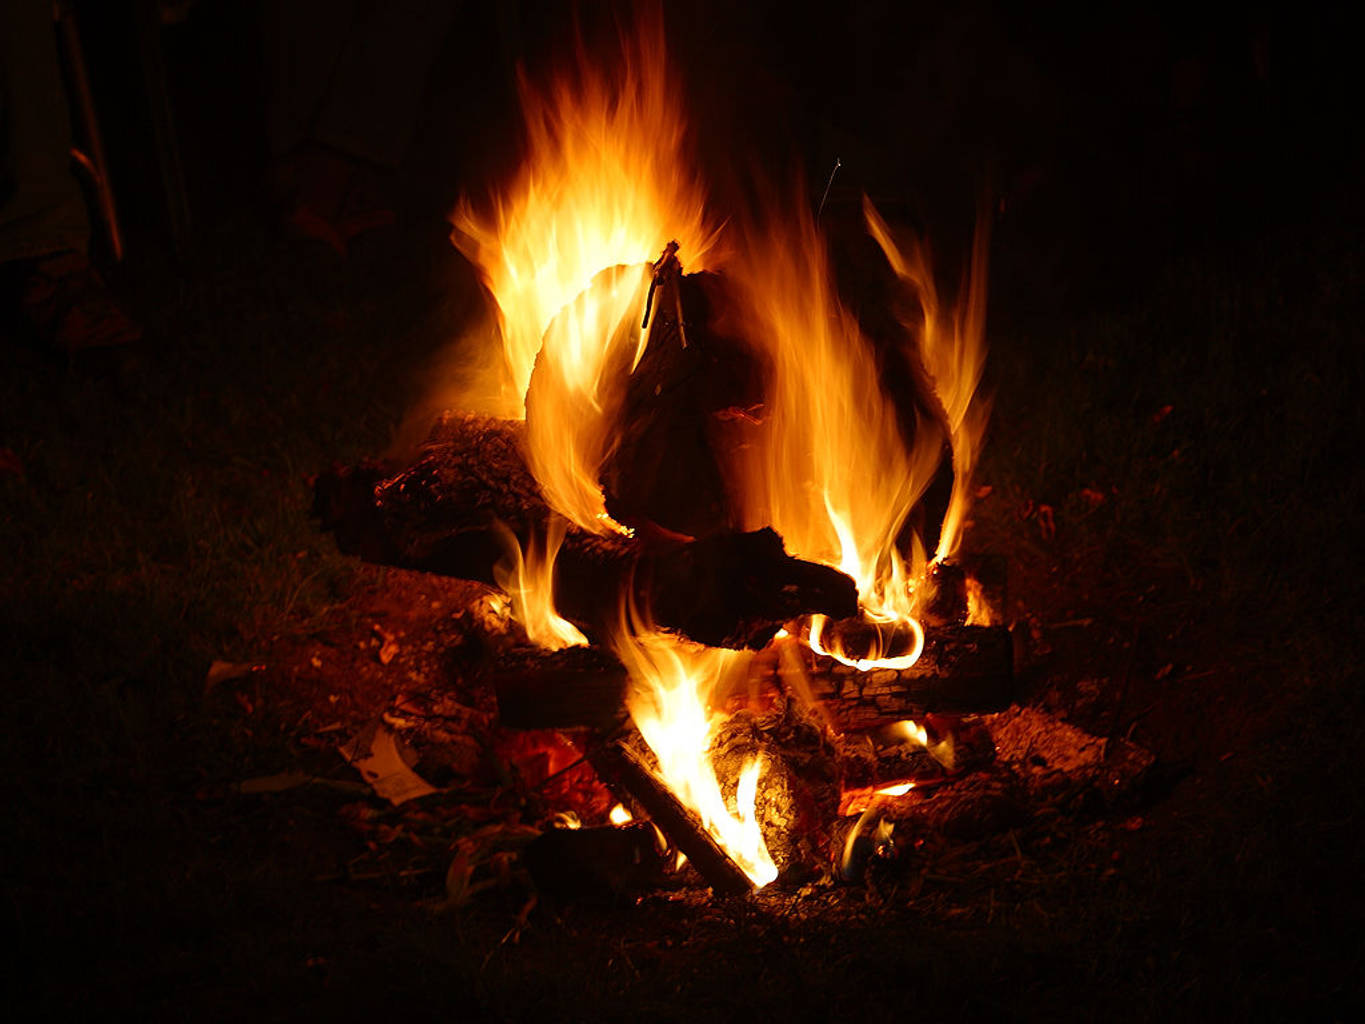 Campfire Background Image Wallpaper Or Texture For